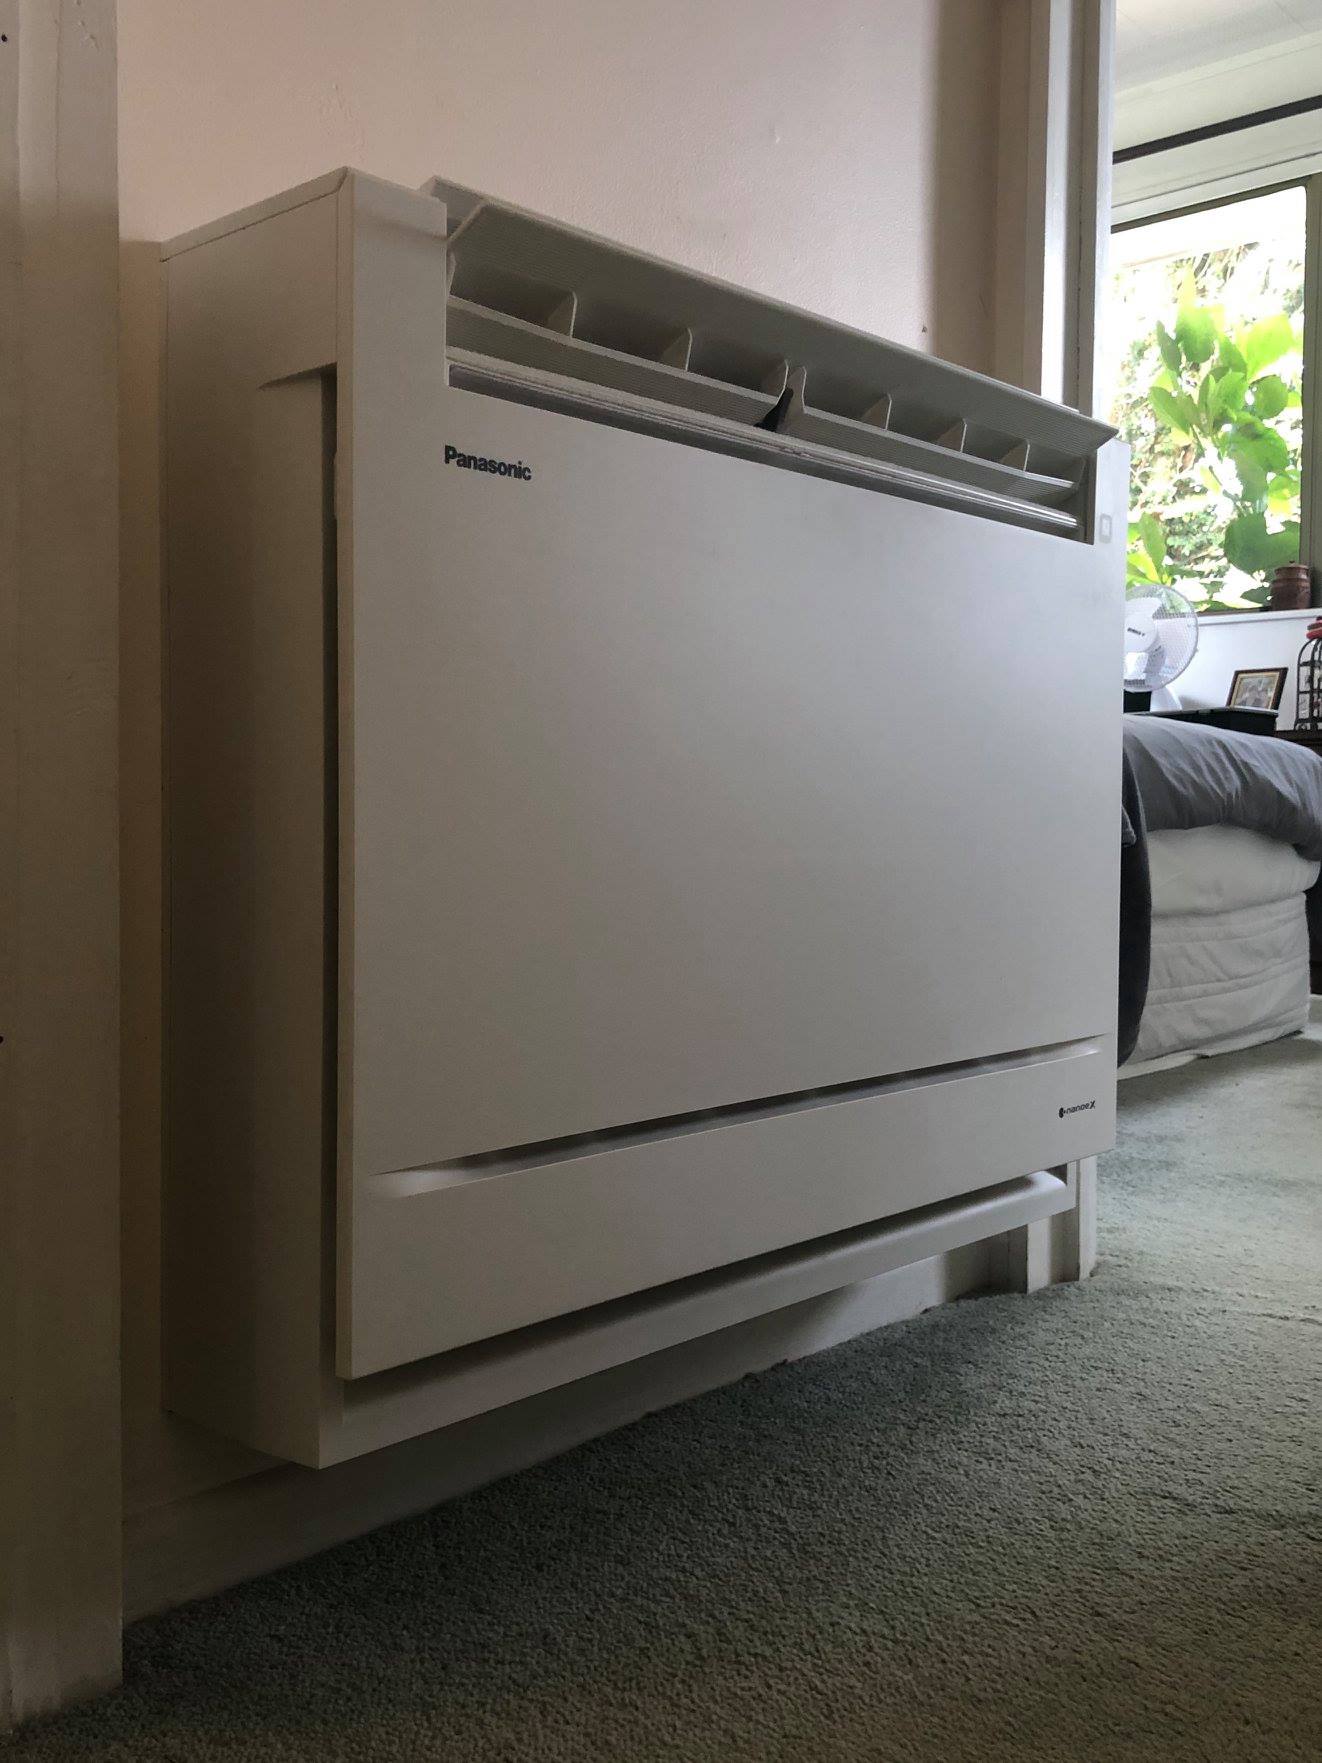 KES Electrical - Heatpump - Air Conditioning - Heating and Cooling, Panasonic - New Plymouth